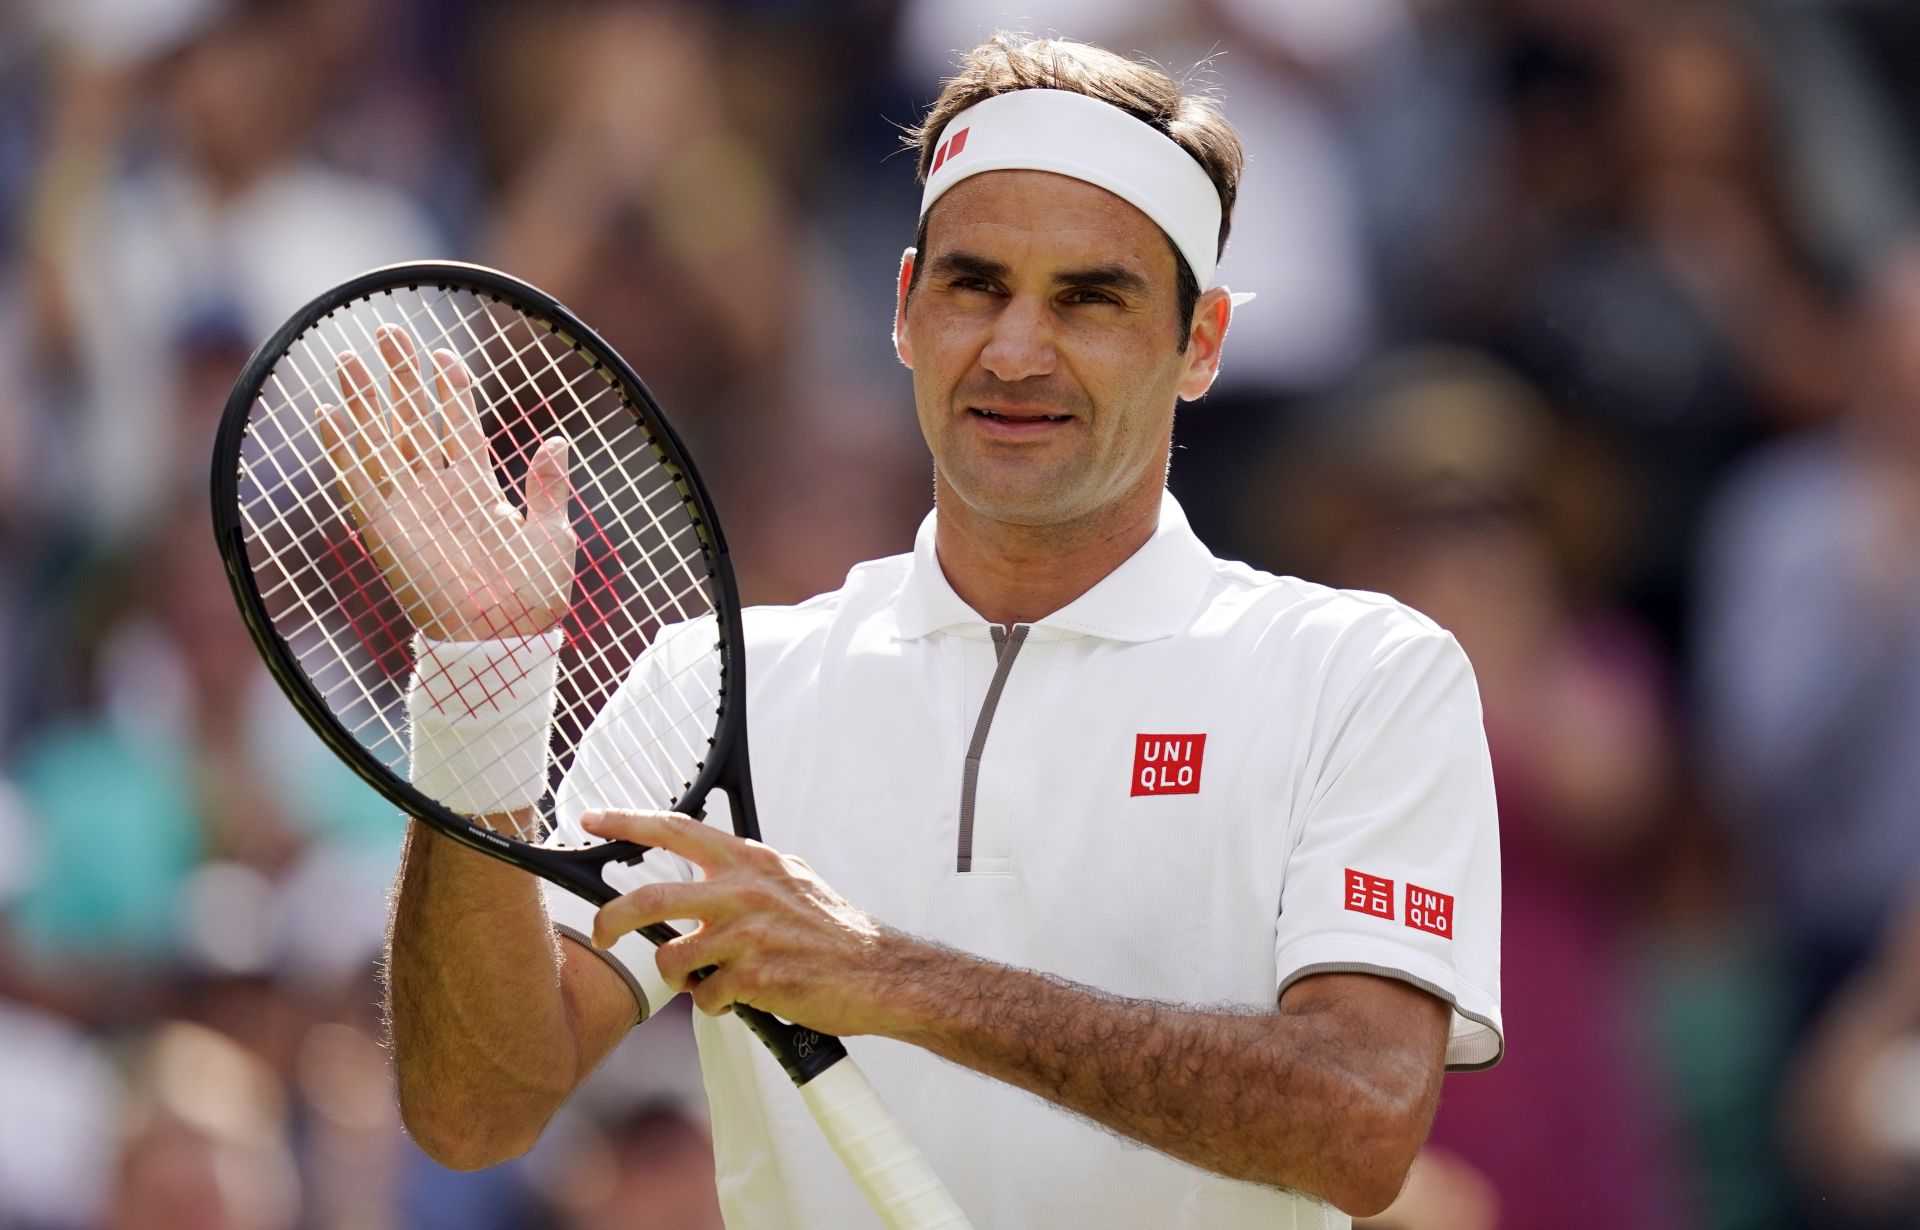 epa07689933 Roger Federer of Switzerland celebrates his win over Lloyd Harris of South Africa in their first round match during the Wimbledon Championships at the All England Lawn Tennis Club, in London, Britain, 02 July 2019. EPA/WILL OLIVER EDITORIAL USE ONLY/NO COMMERCIAL SALES